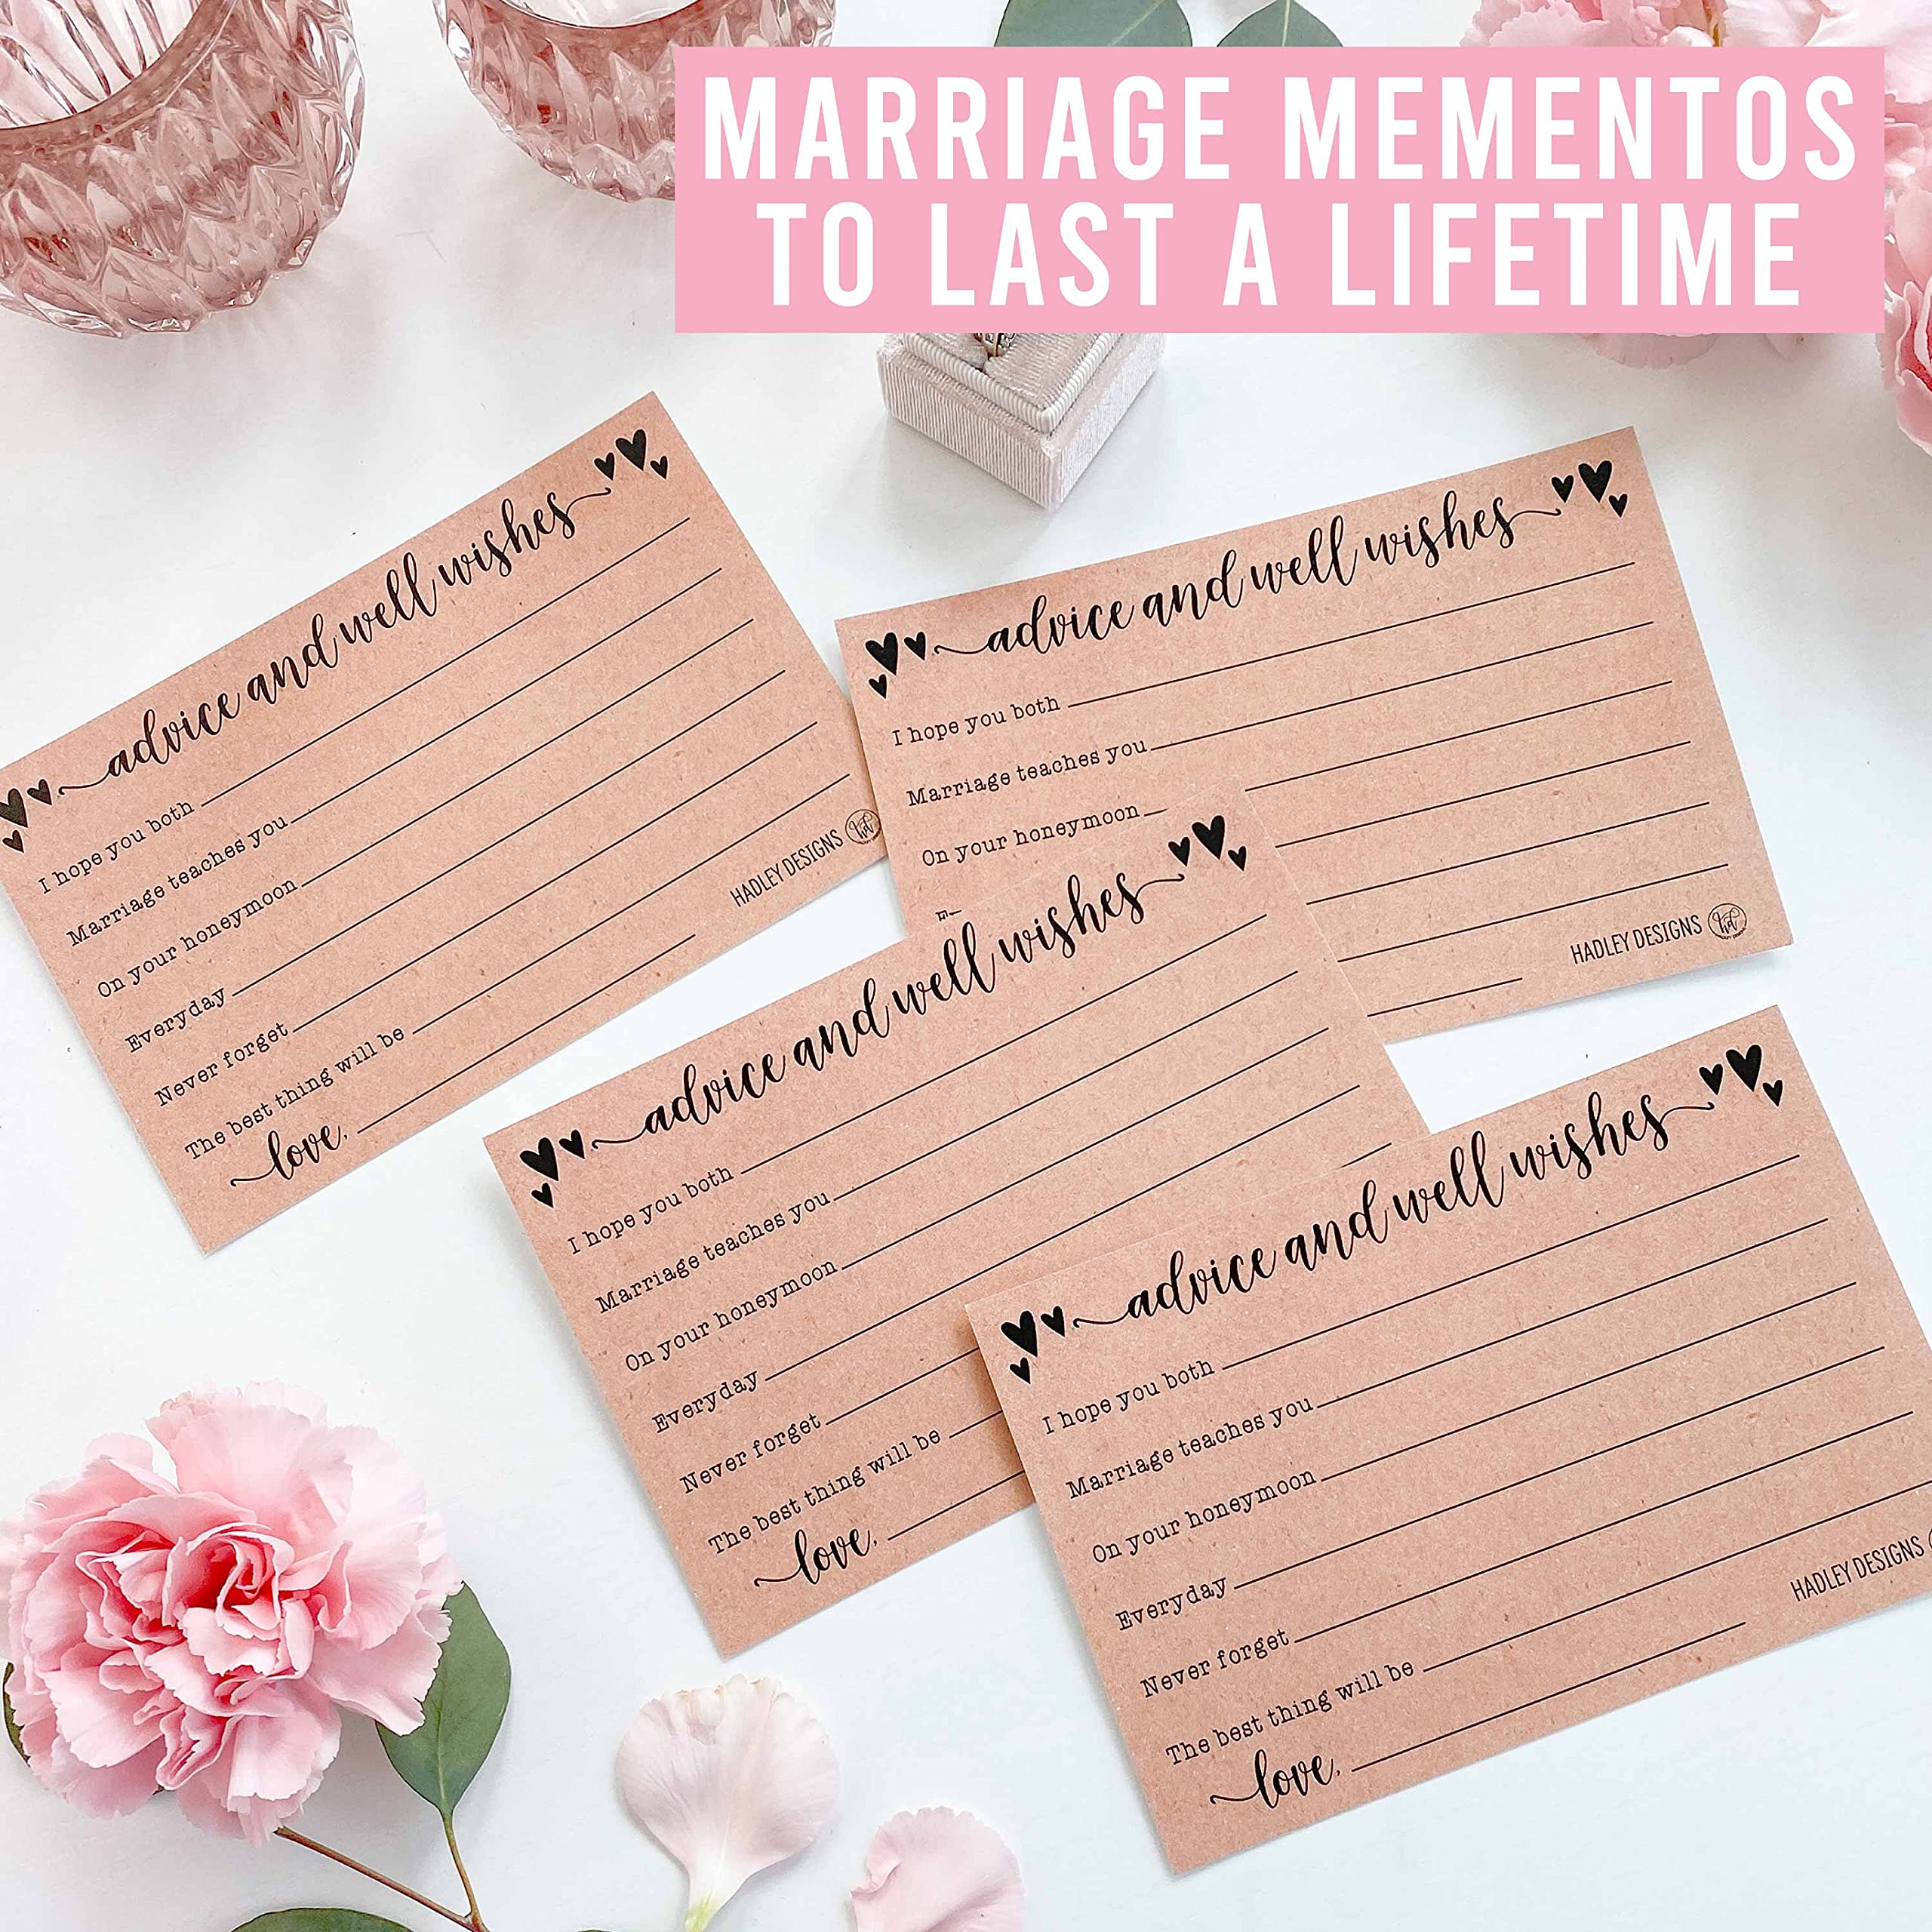 50 Wedding Advice Cards For Bride and Groom, Wedding Card Boxes For Reception, Wedding Guest Book Alternative, Rustic Bridal Shower Games For Guests Wedding Games For Guests Advice For The Bride Cards